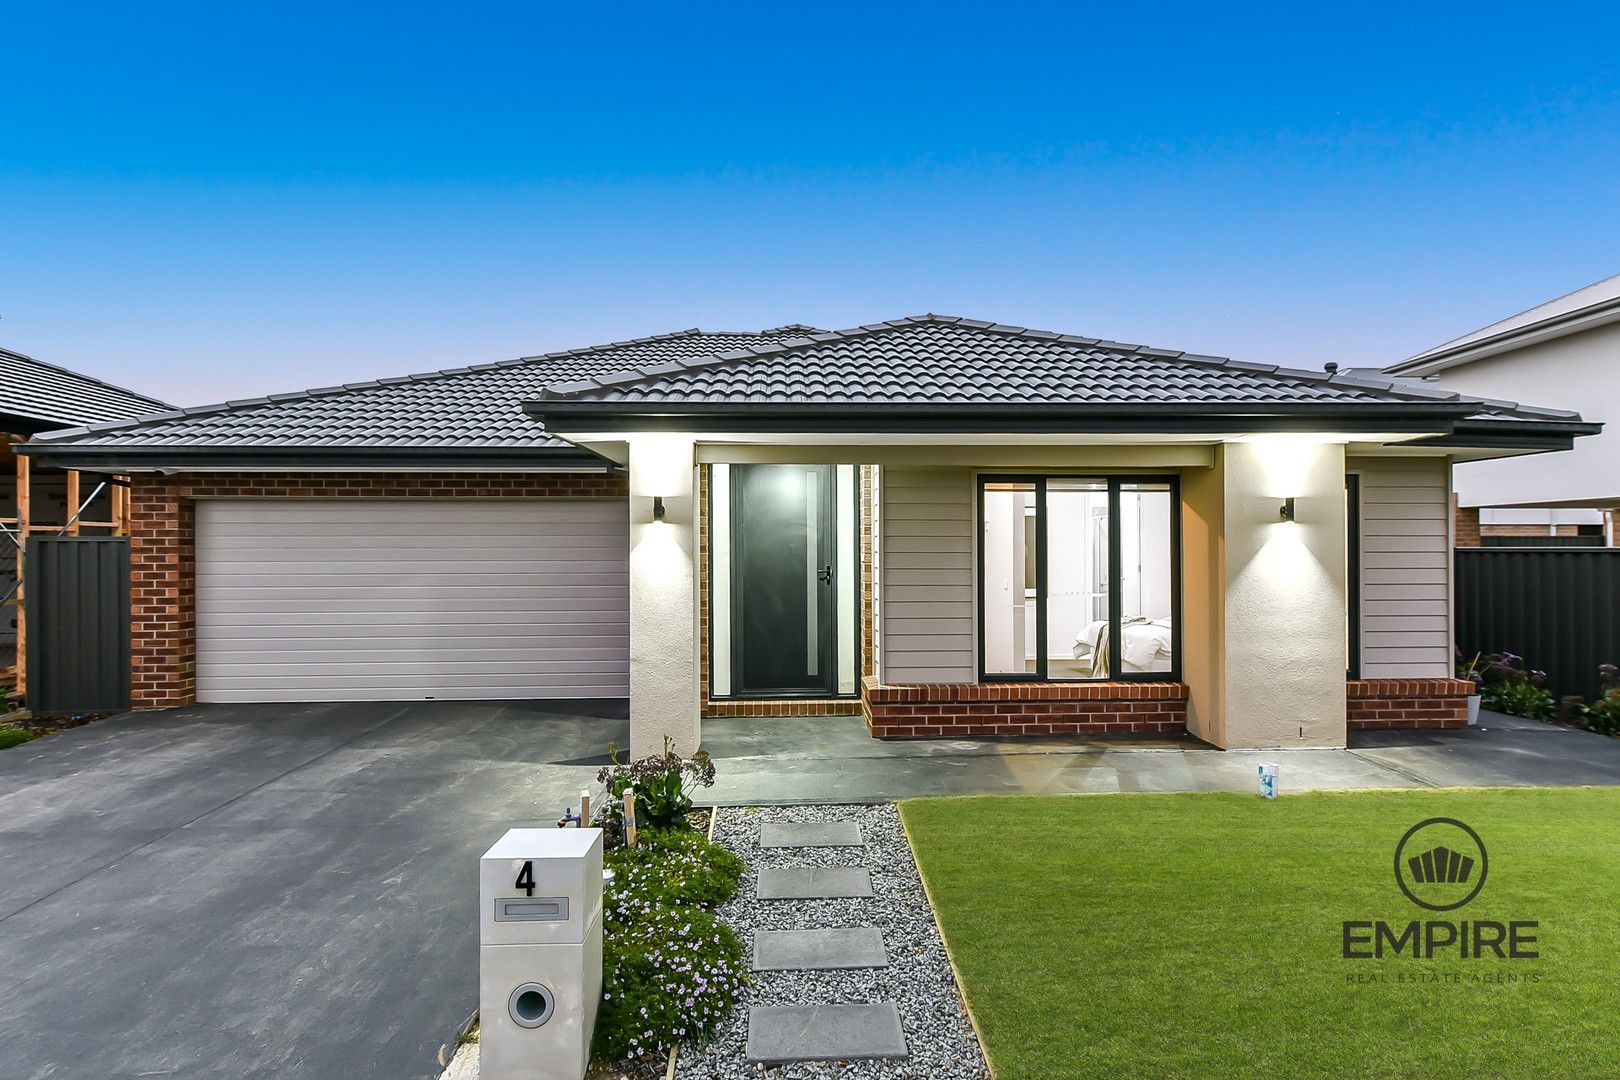 4 bedrooms House in 4 Sepia Street CLYDE NORTH VIC, 3978